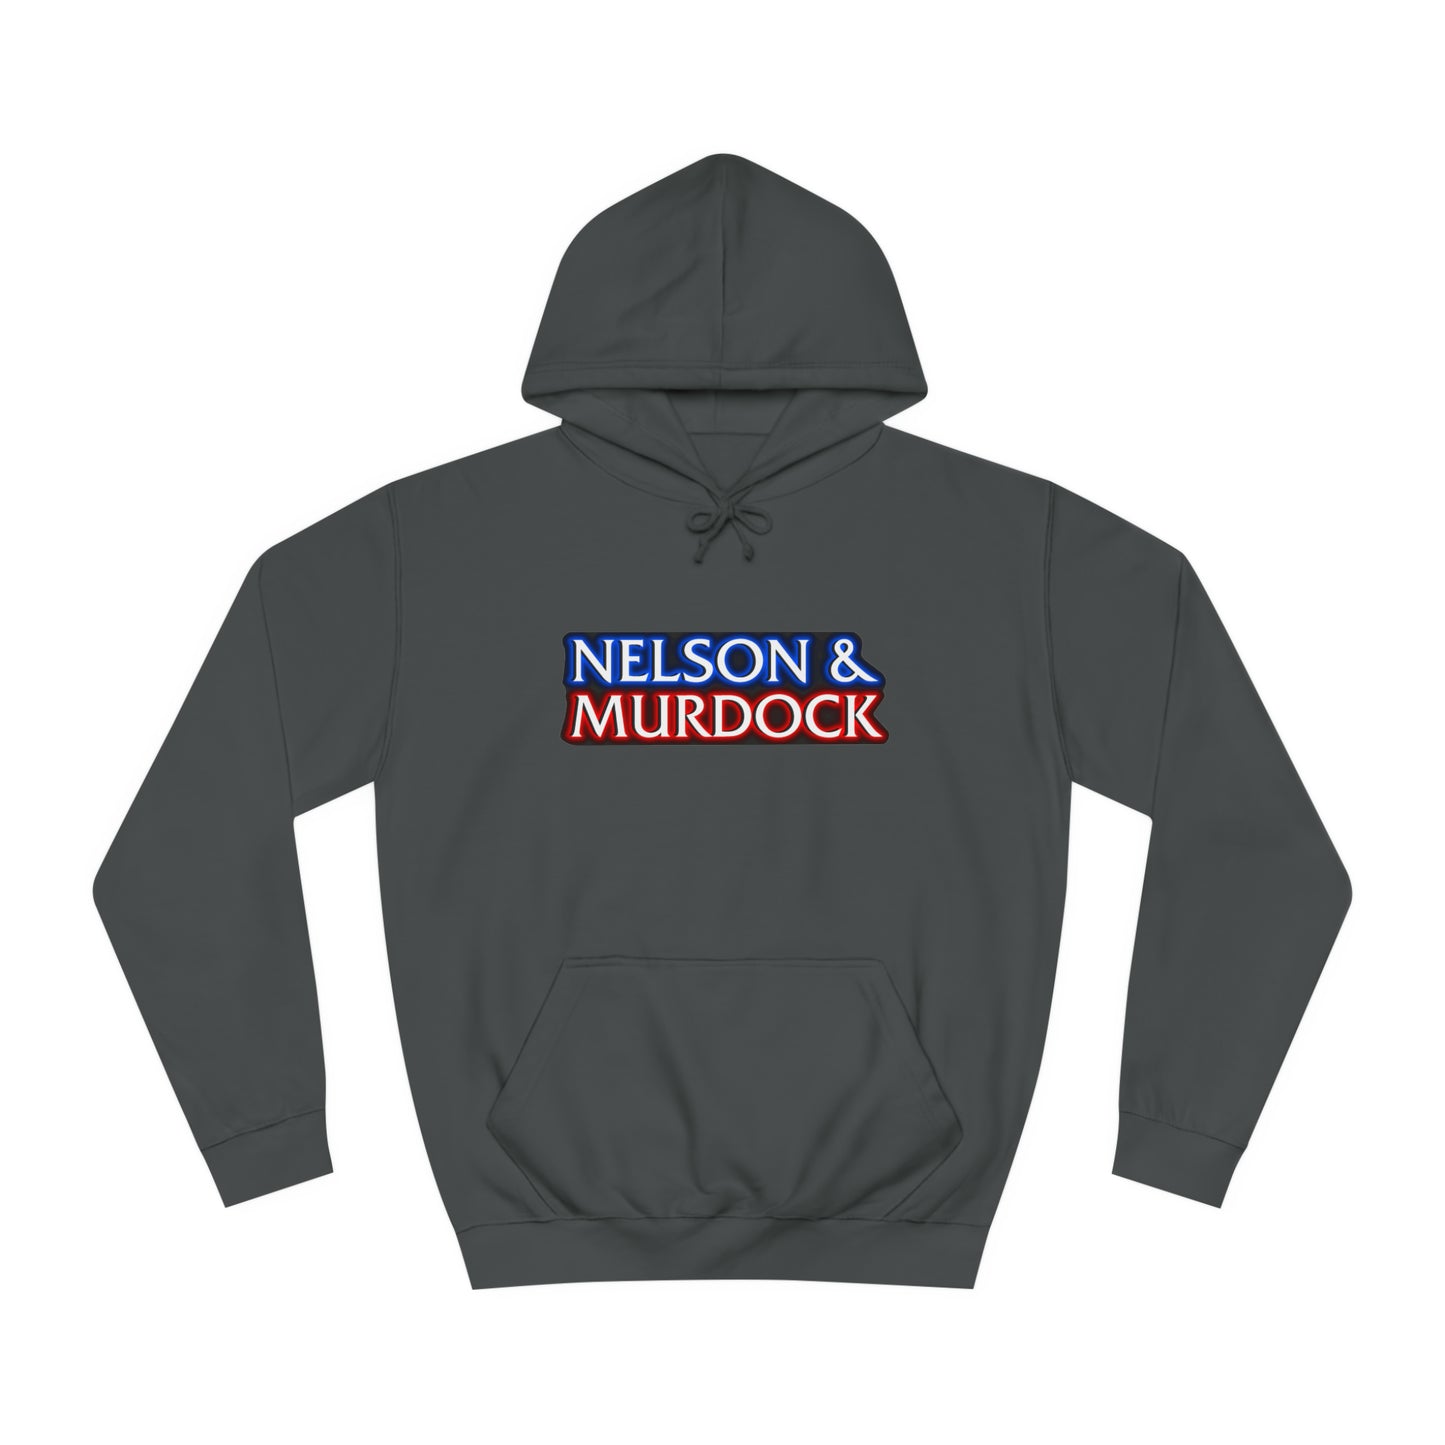 NELSON & MURDOCK - Avocados at Law HOODIE